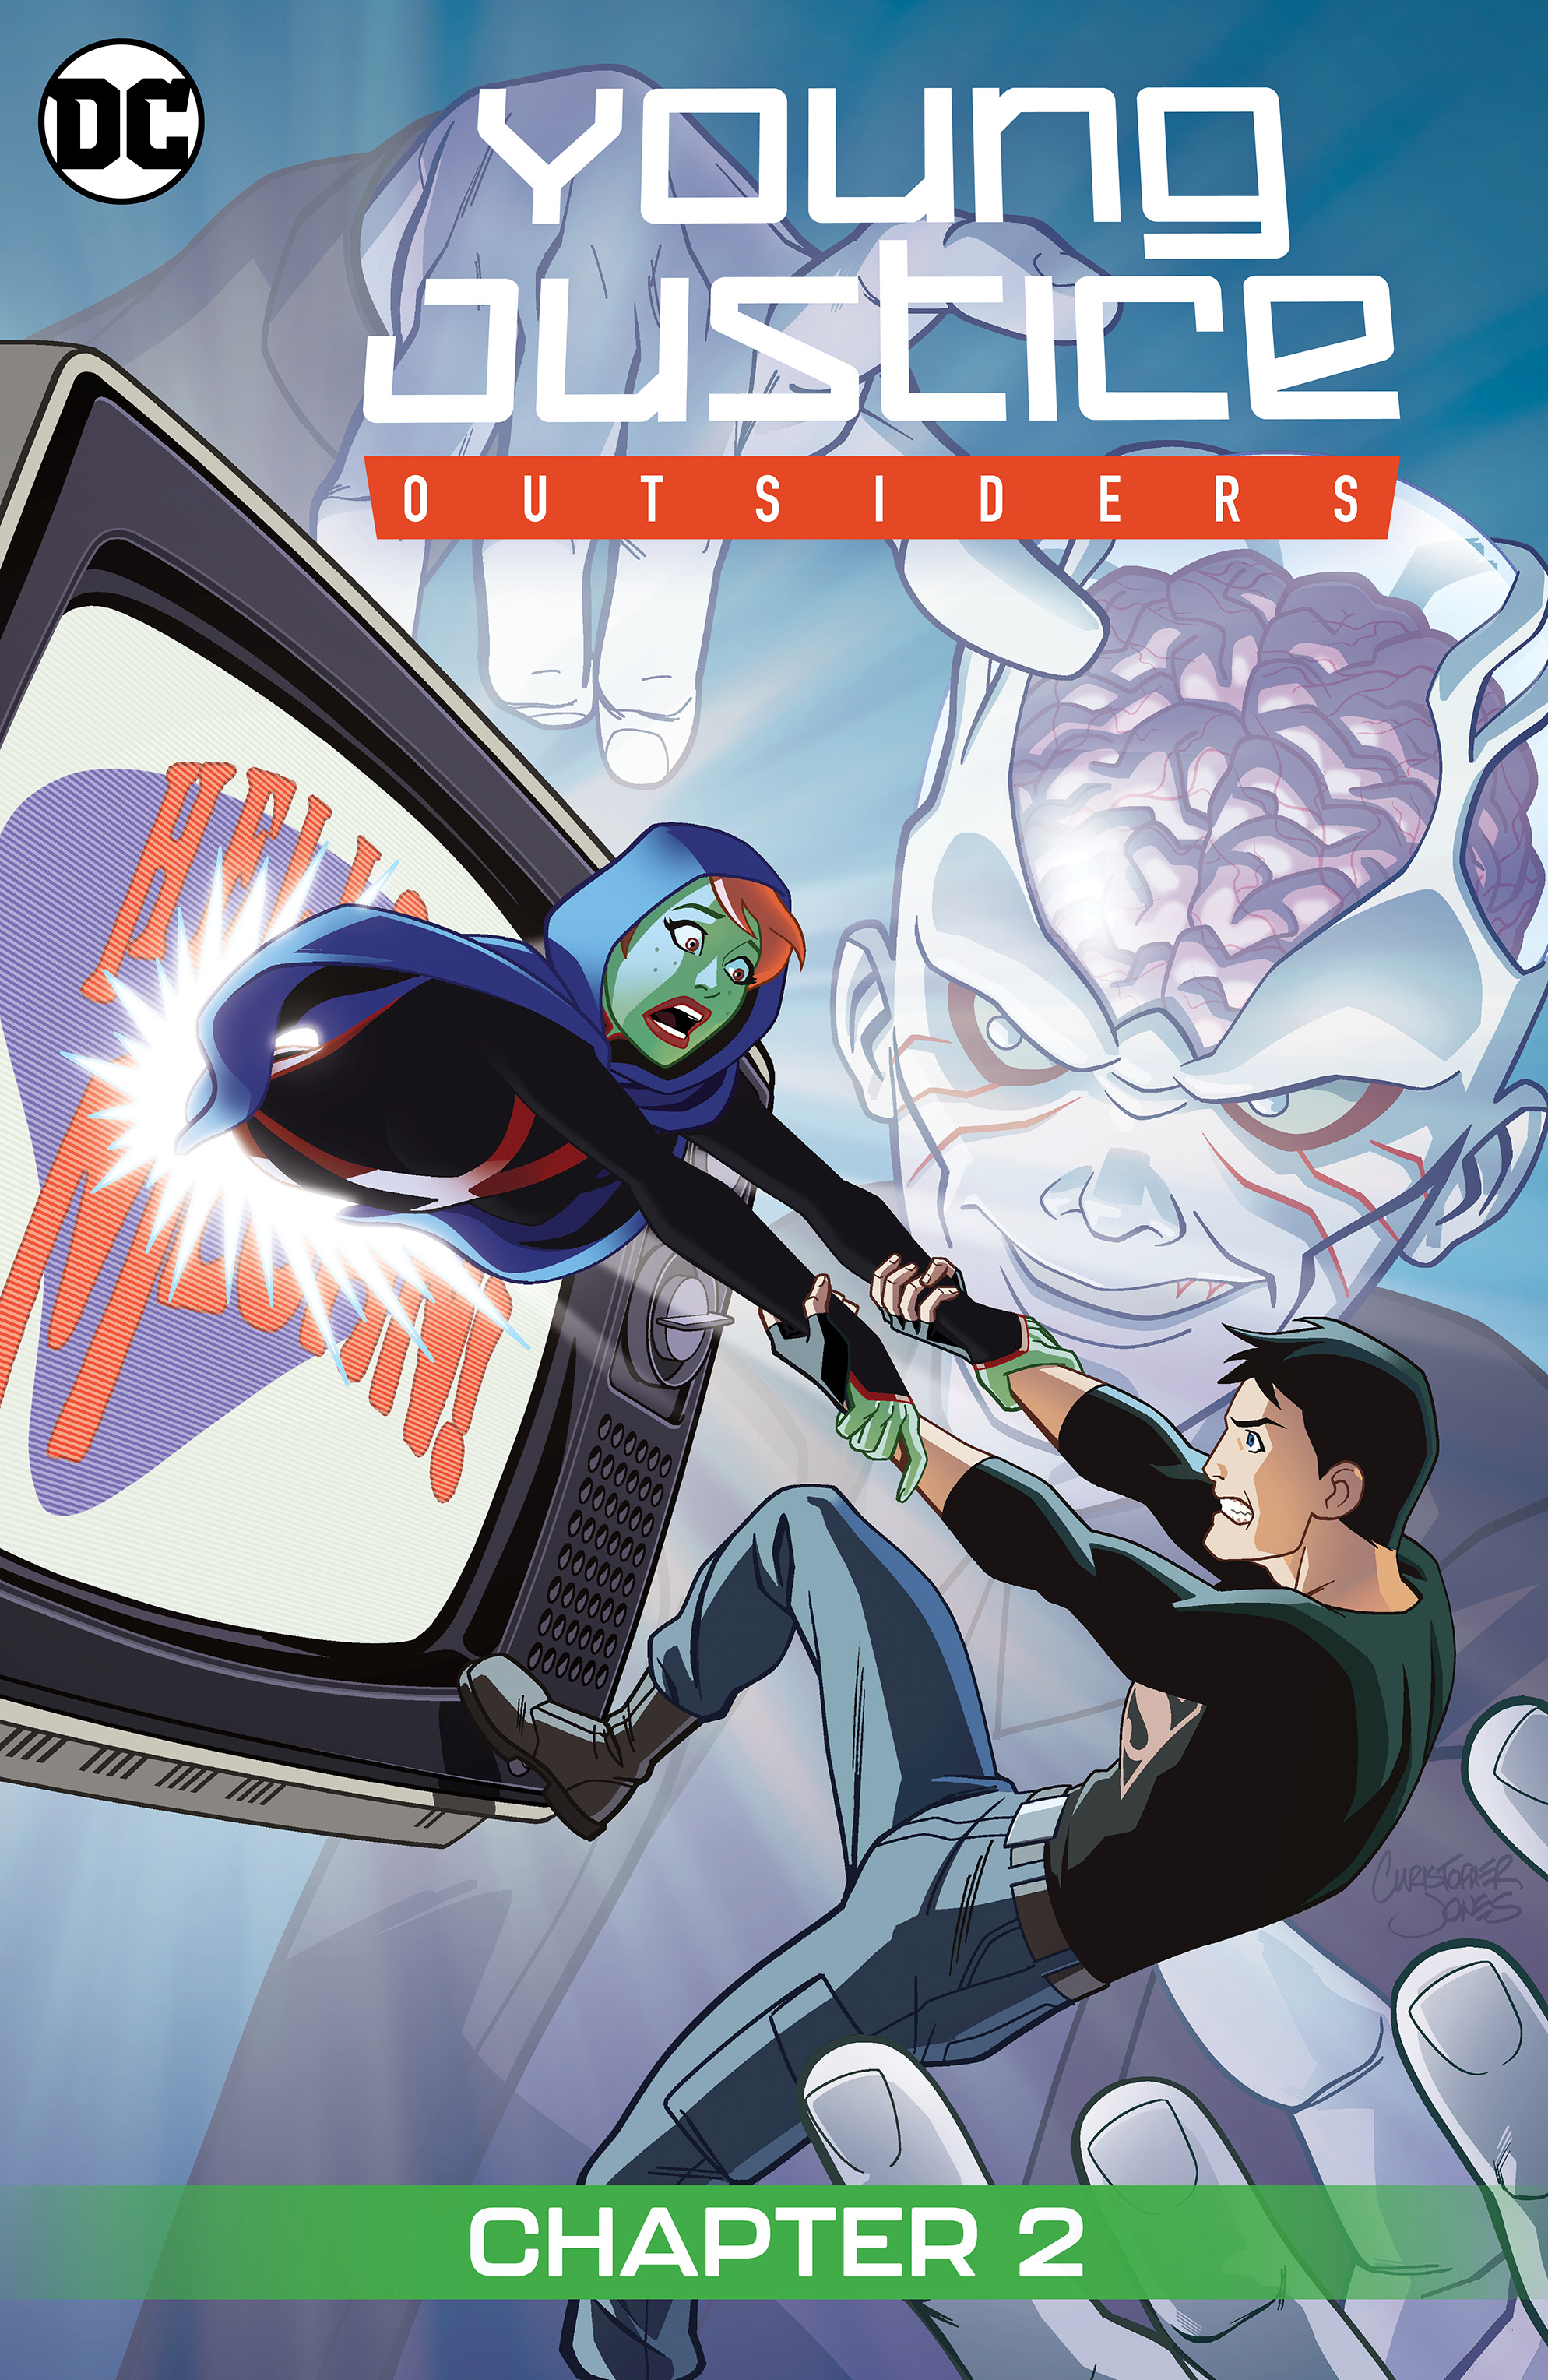 Young Justice: Outsiders (DC Universe Exclusive) #2 preview images